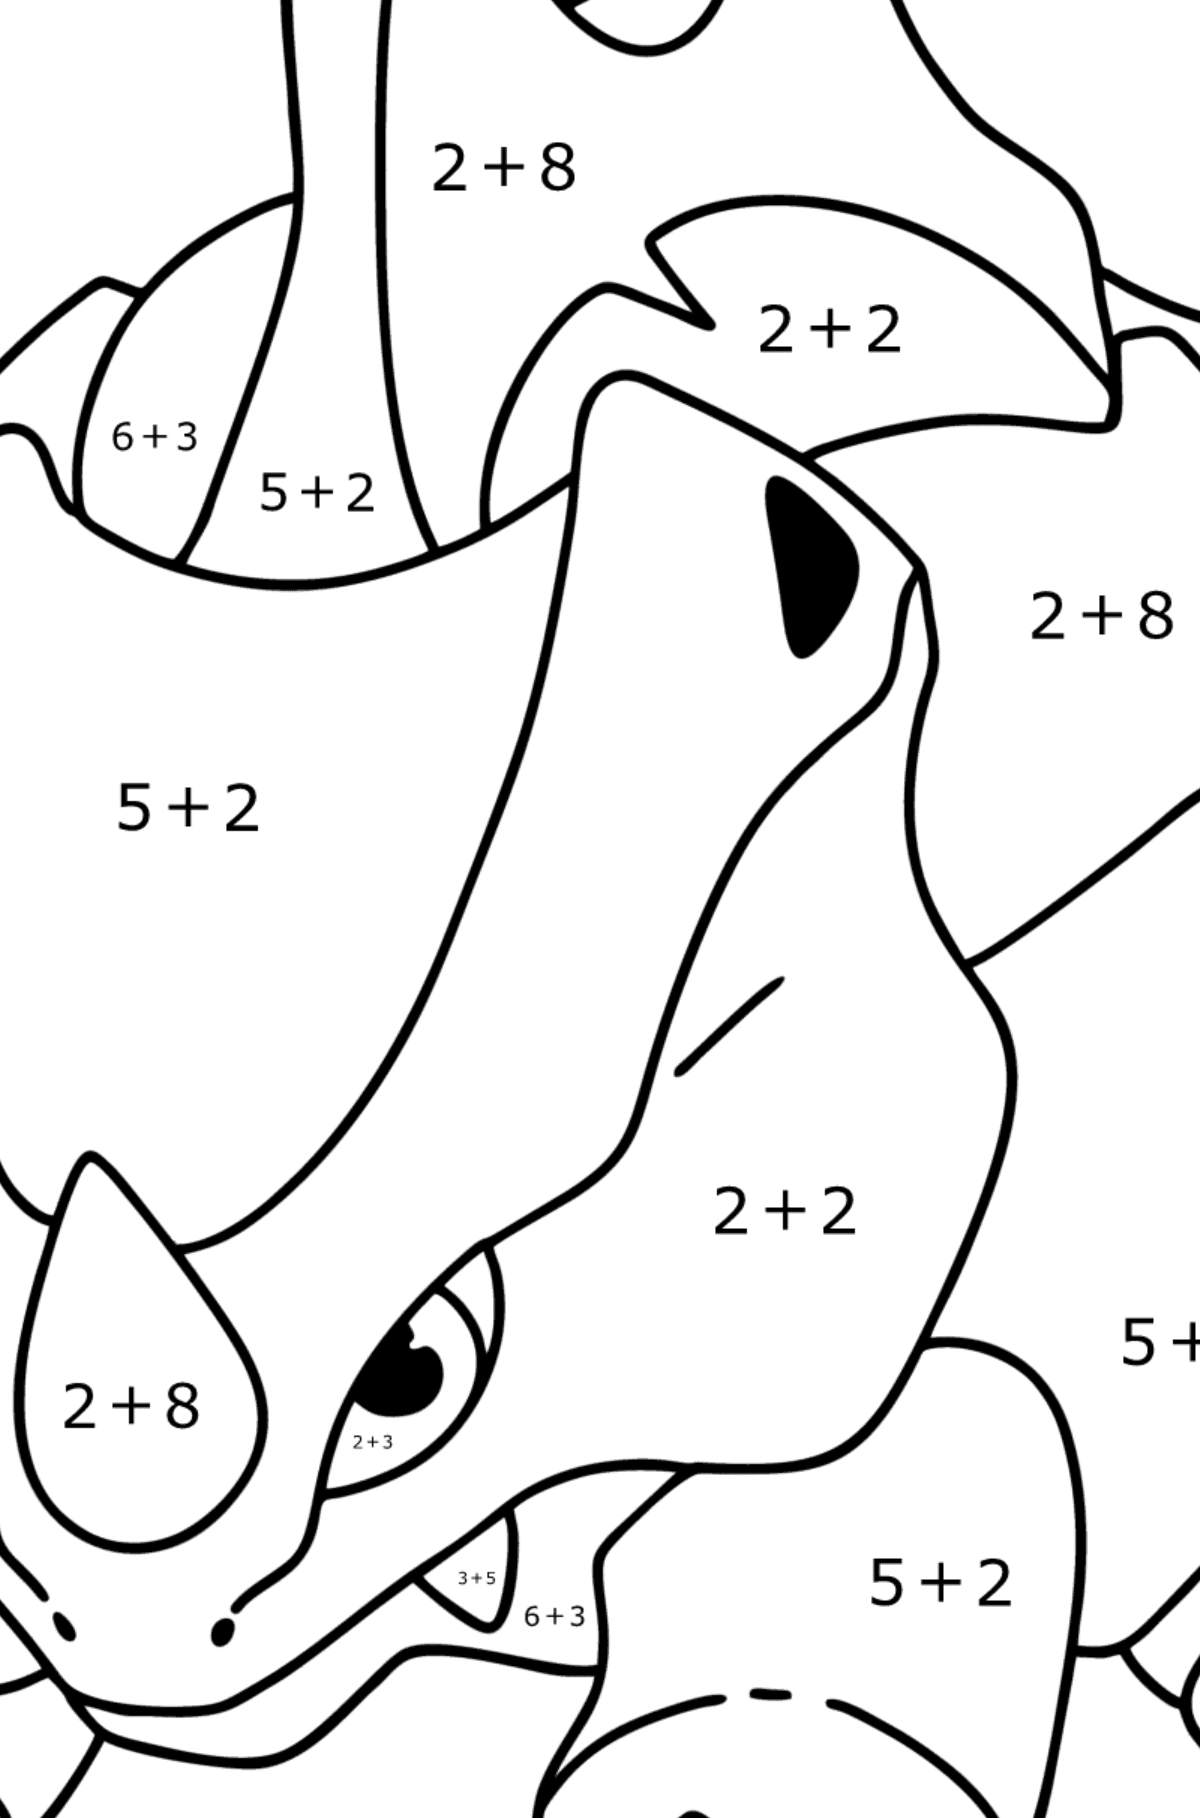 Coloring page Pokemon Go Rhyhorn - Math Coloring - Addition for Kids